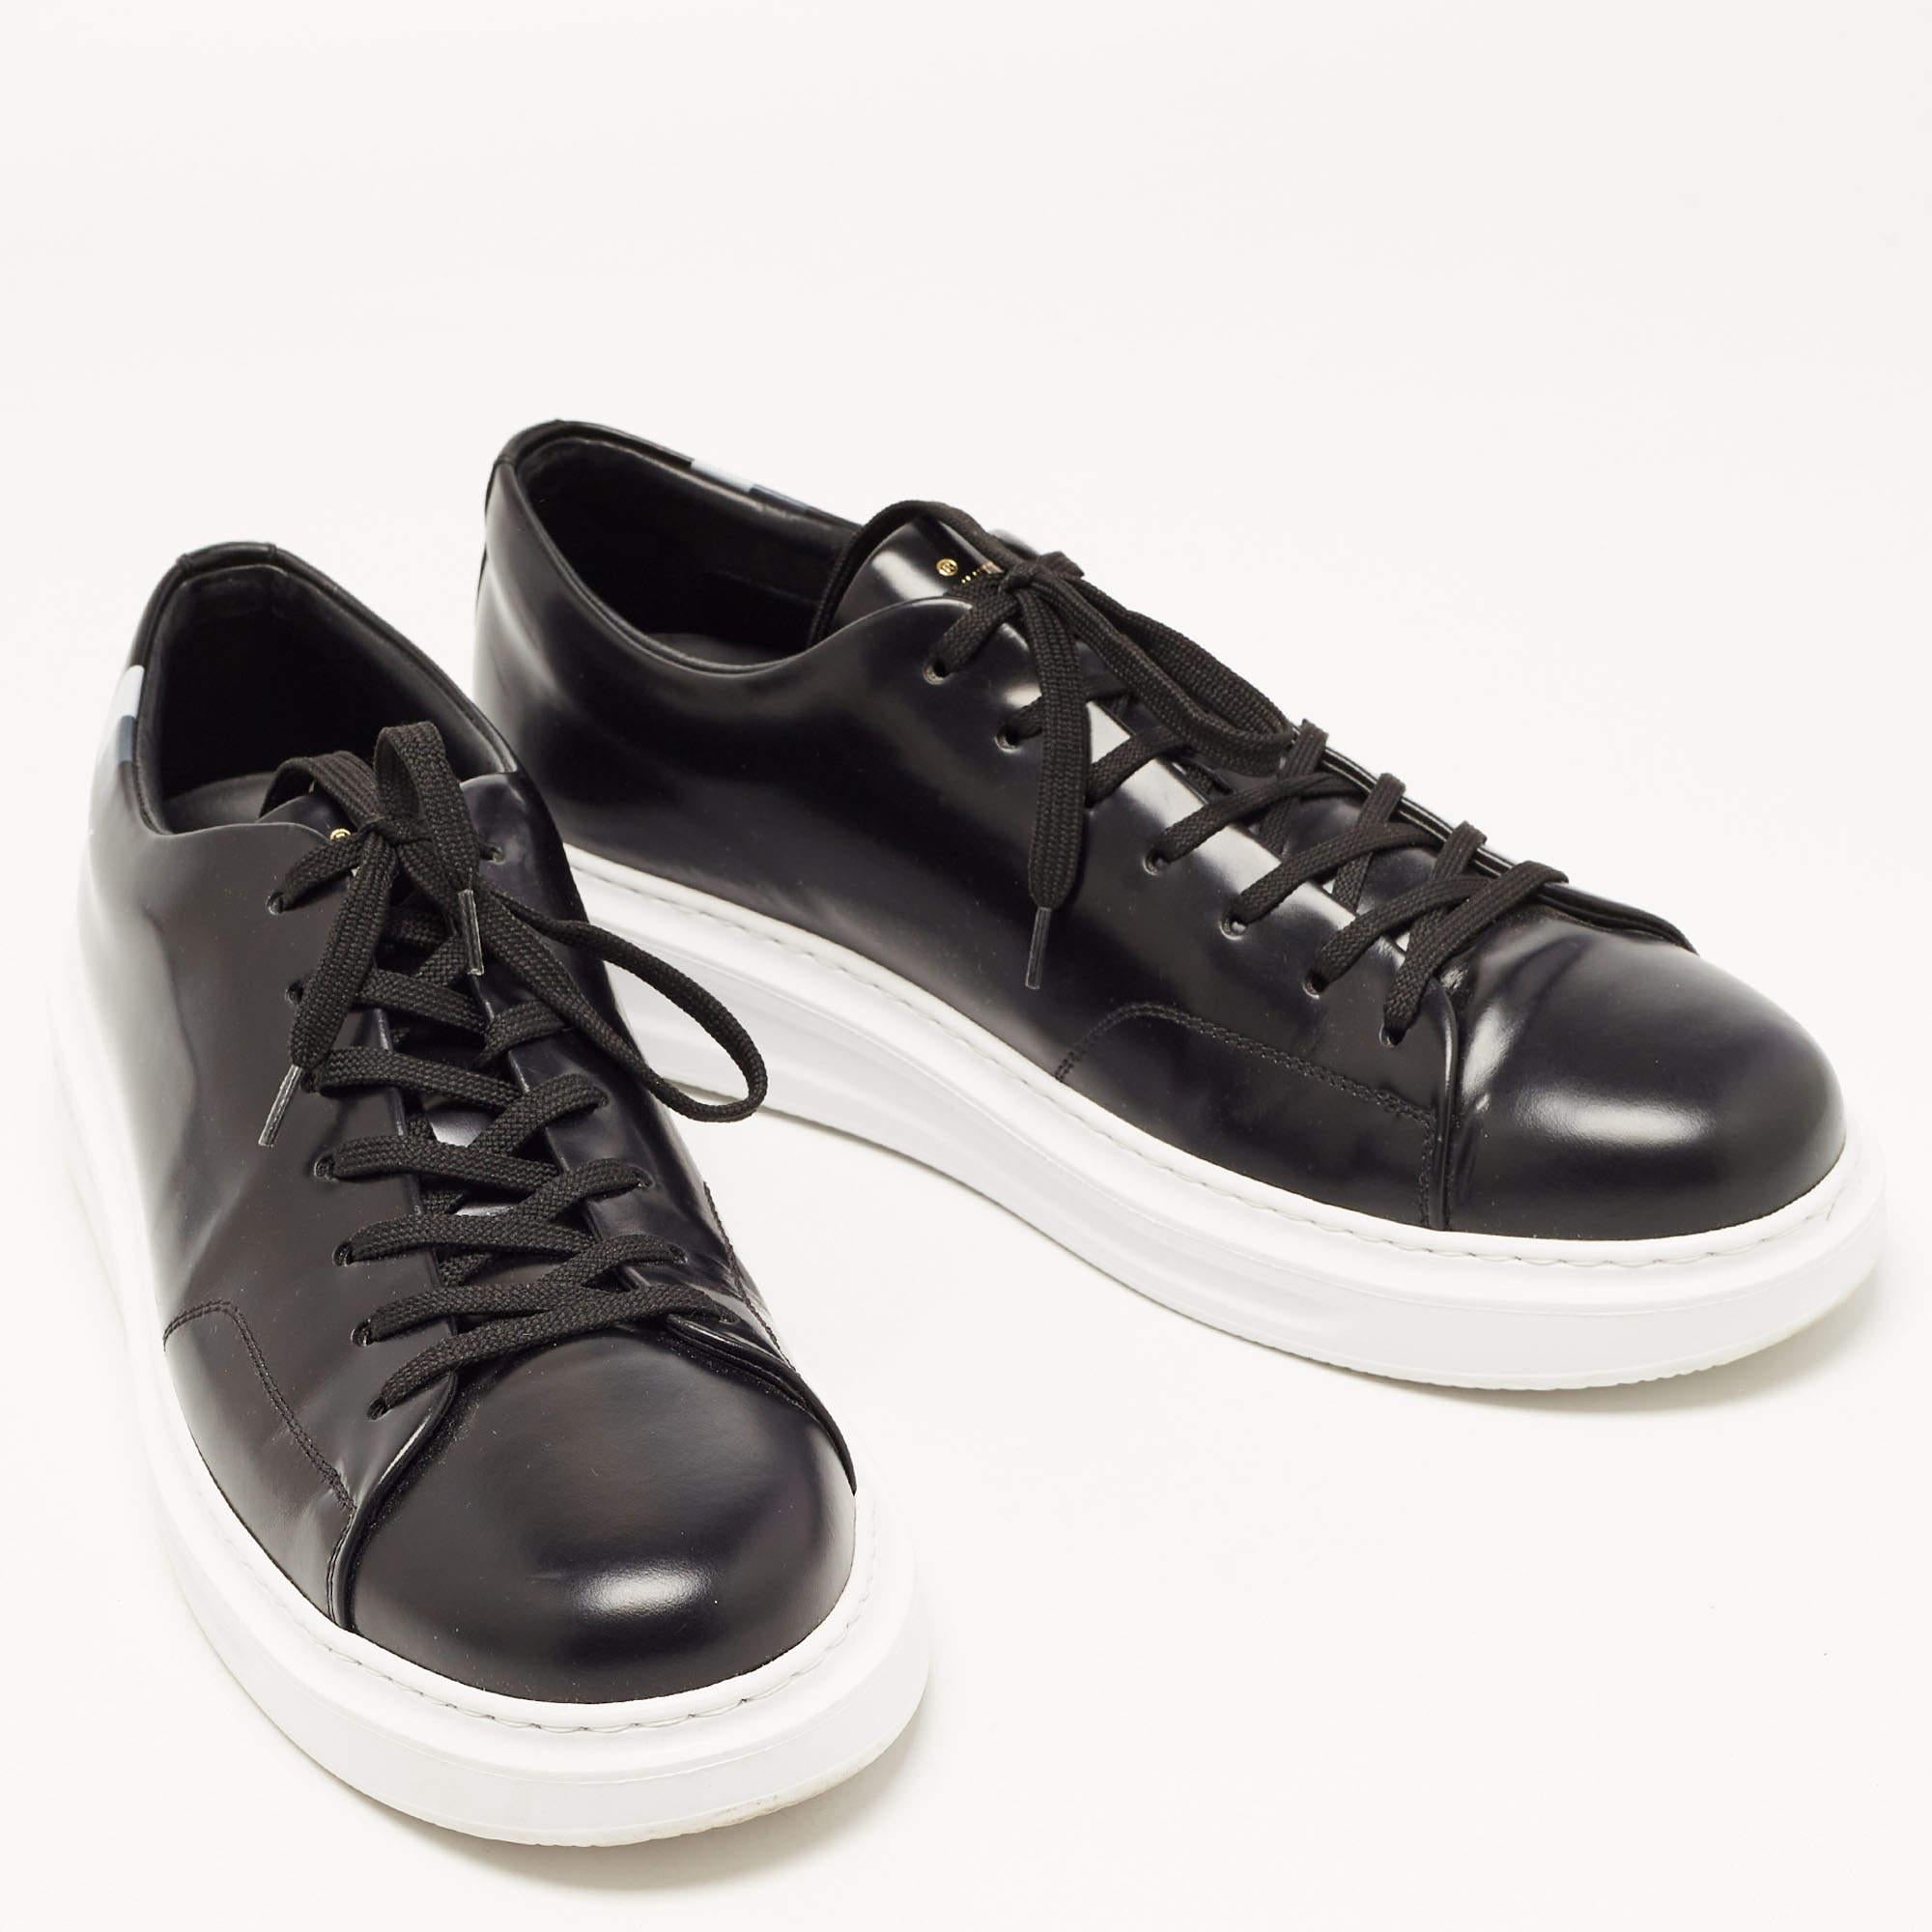 Men's Louis Vuitton Black Leather Beverly Hills Sneakers Size 44